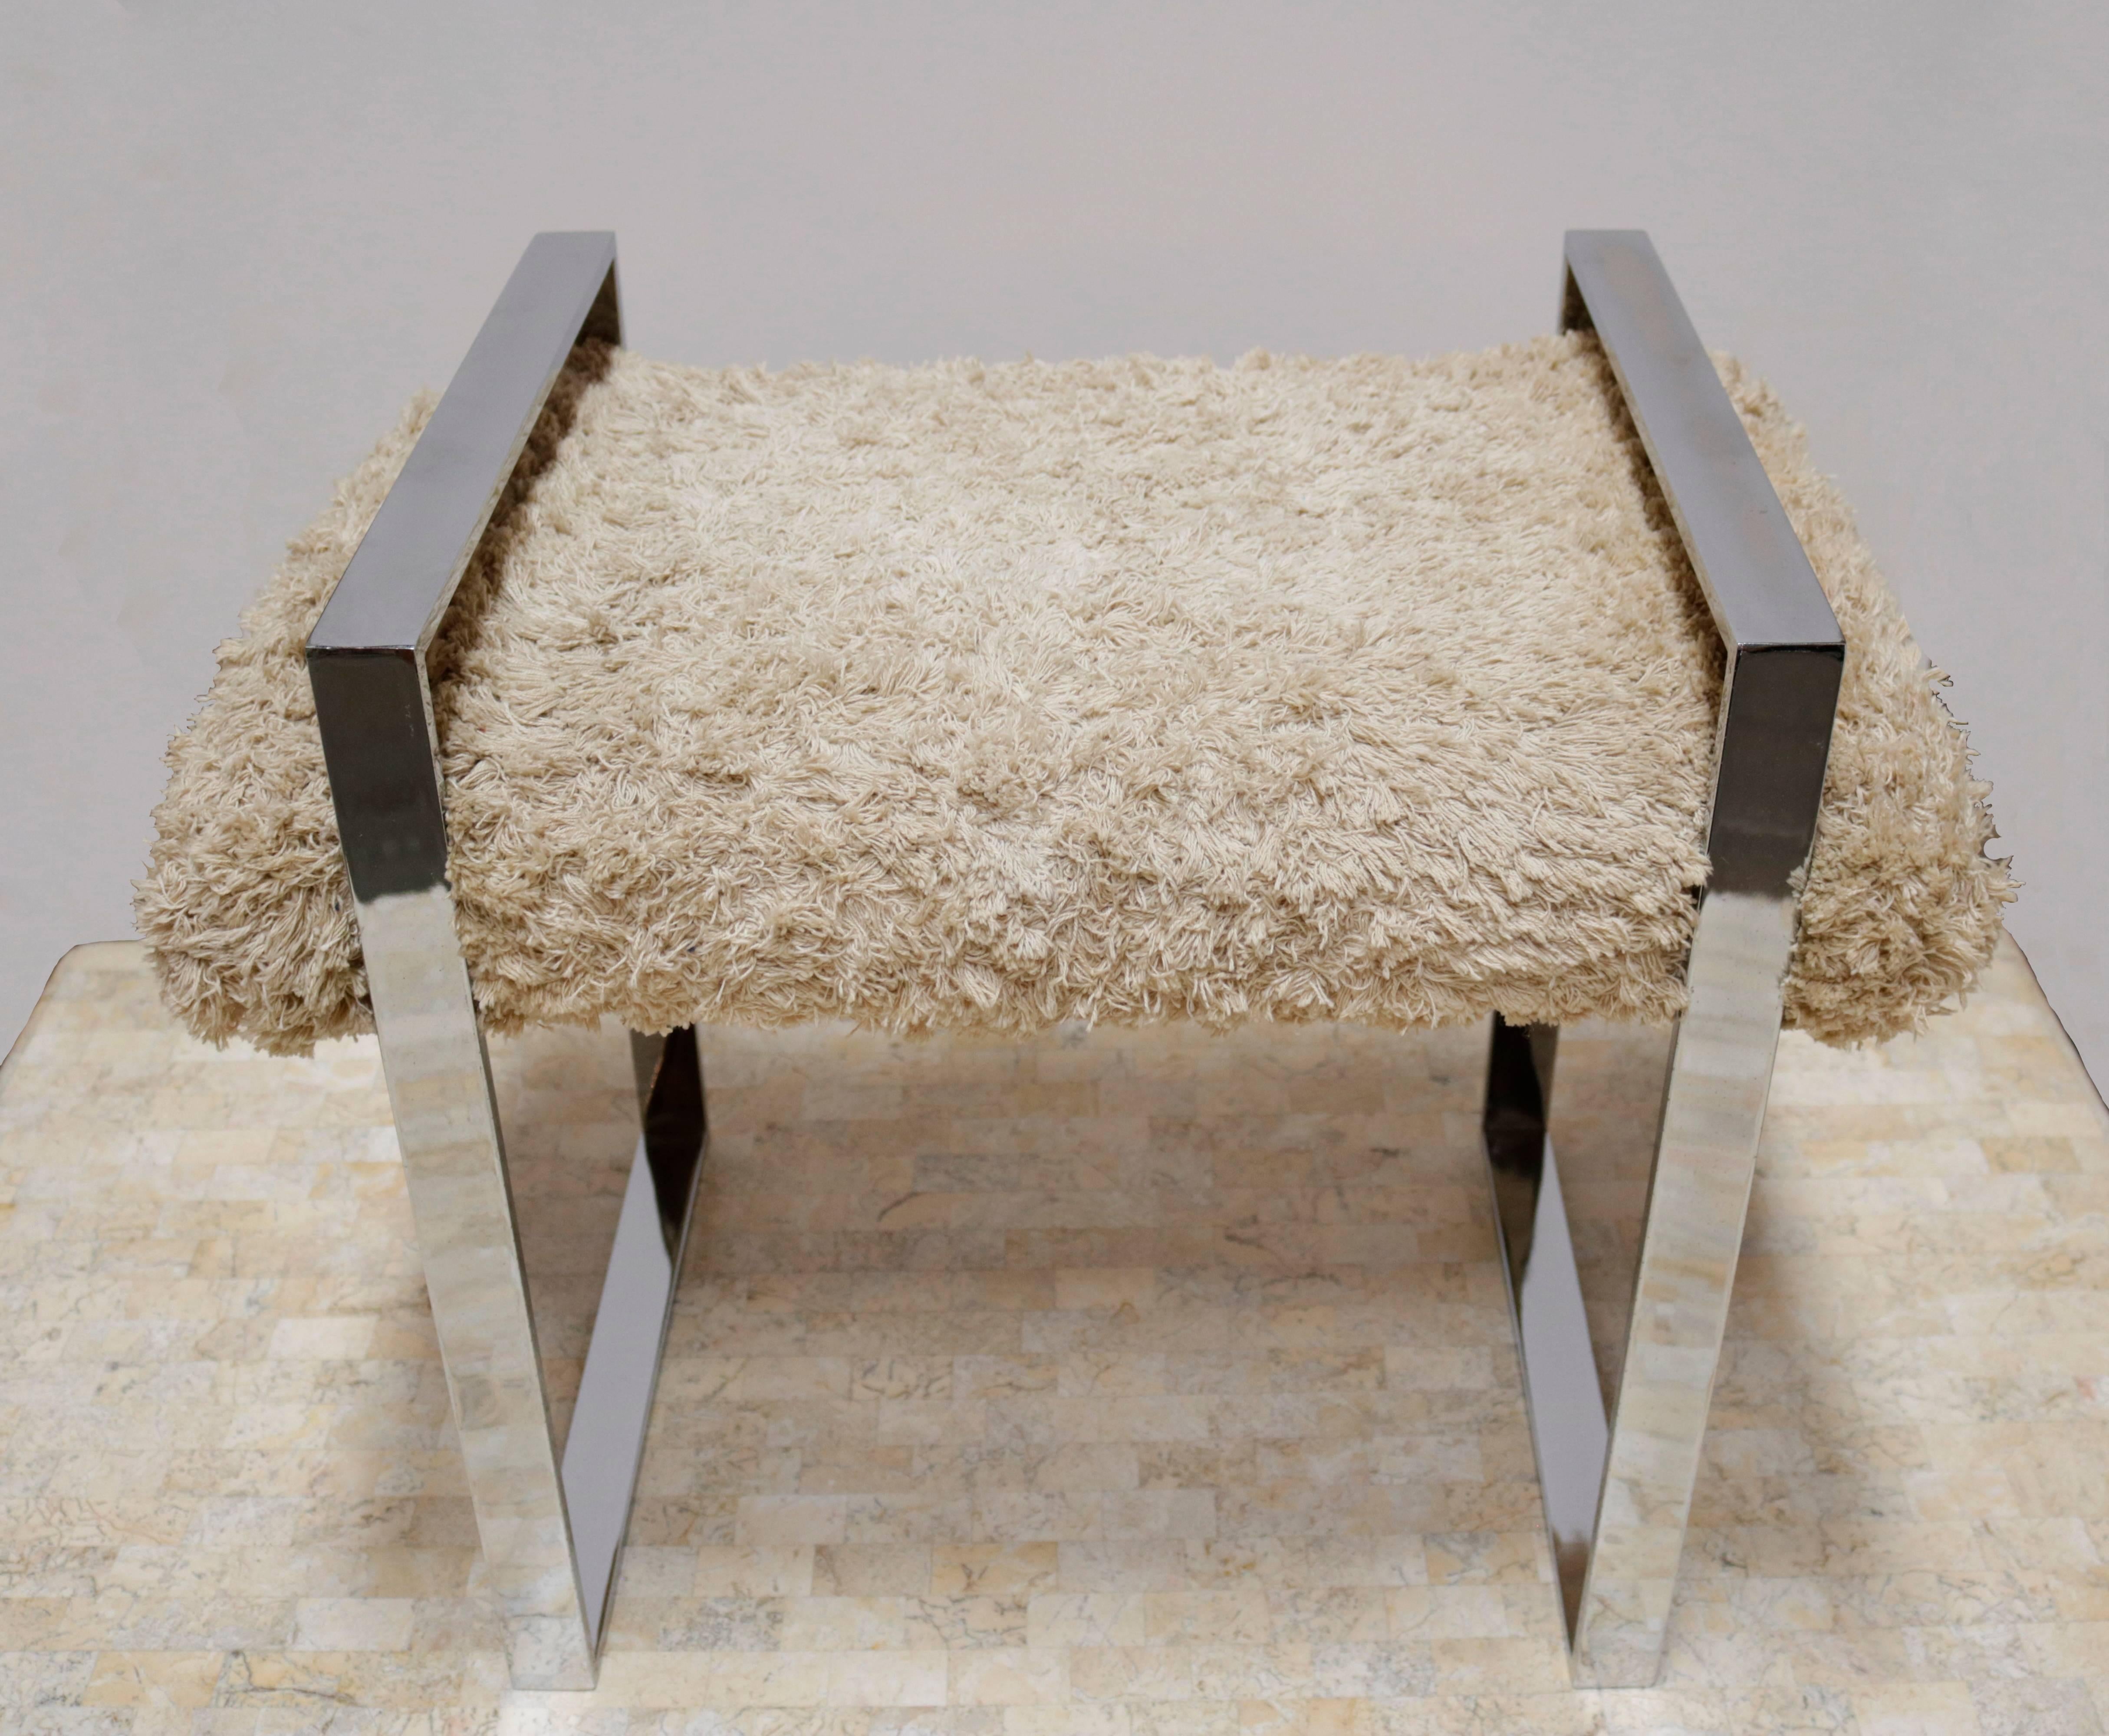 The frame of this bench is made of chromed steel and the upholstery is of cotton fabric looking like sheep fur.